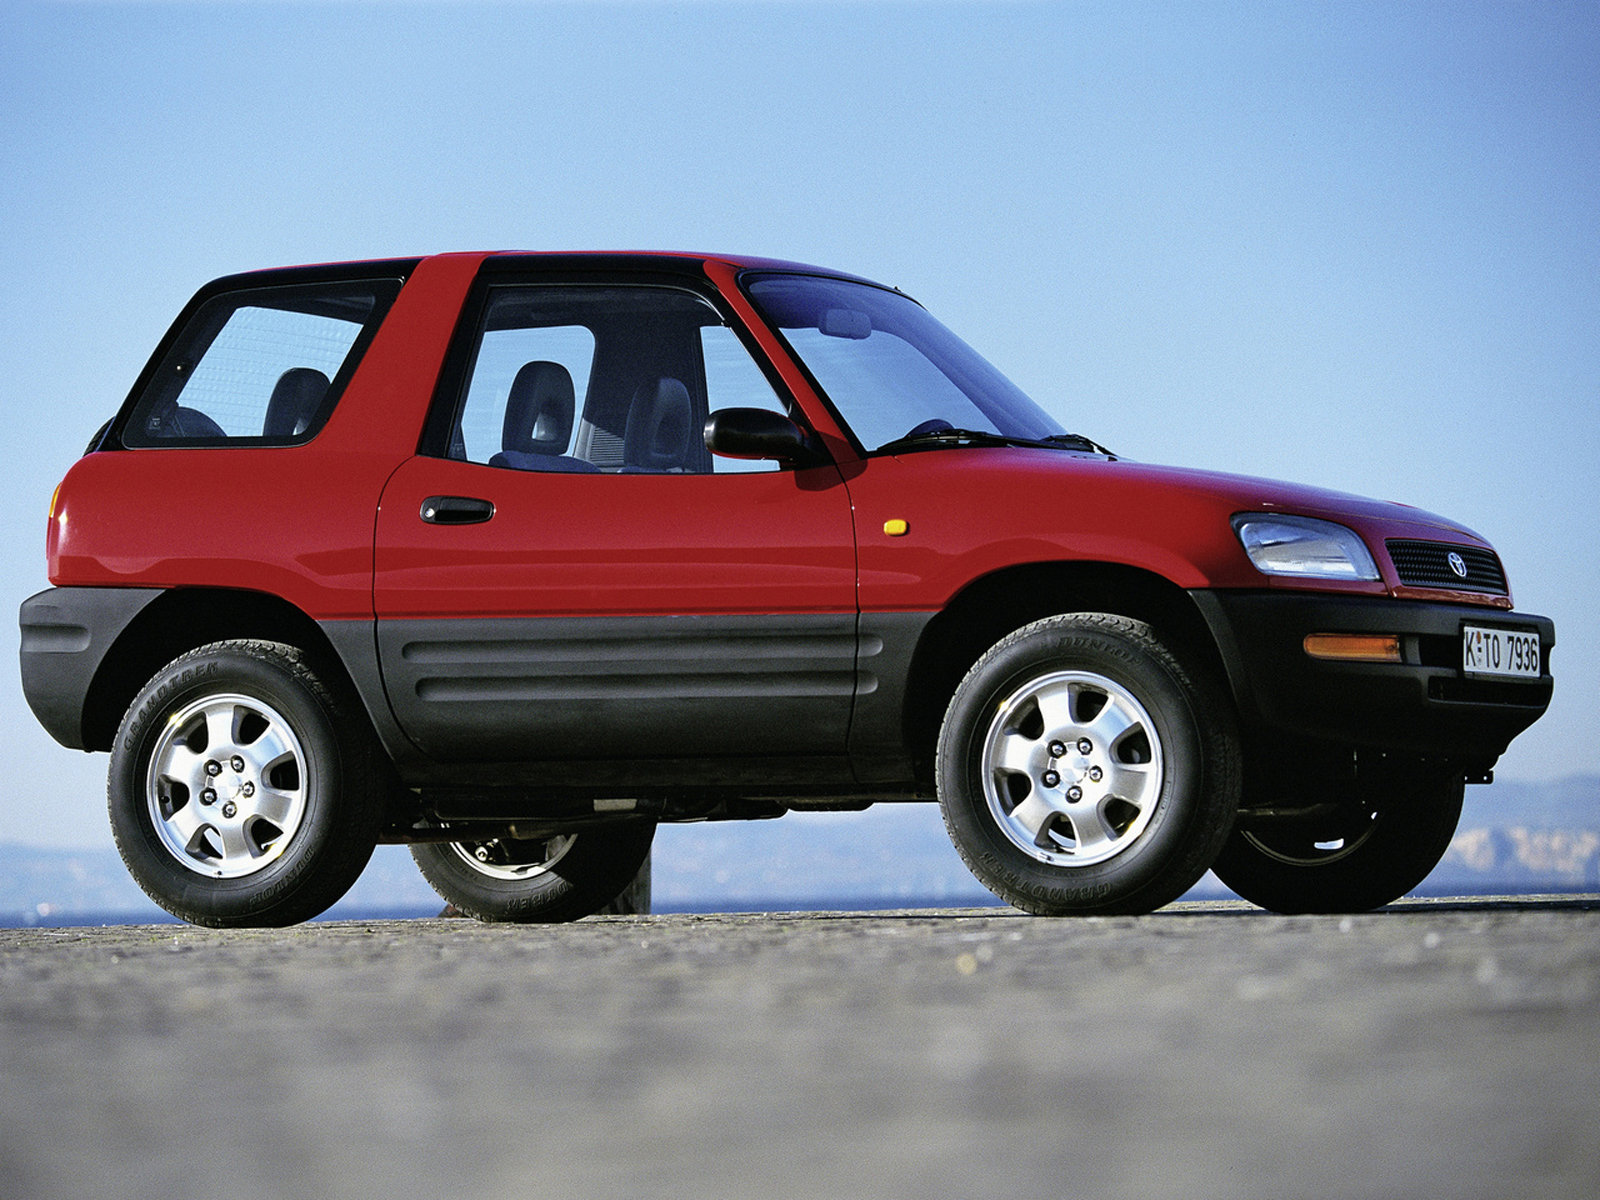 Toyota RAV4 1994 Review, Amazing Pictures and Images